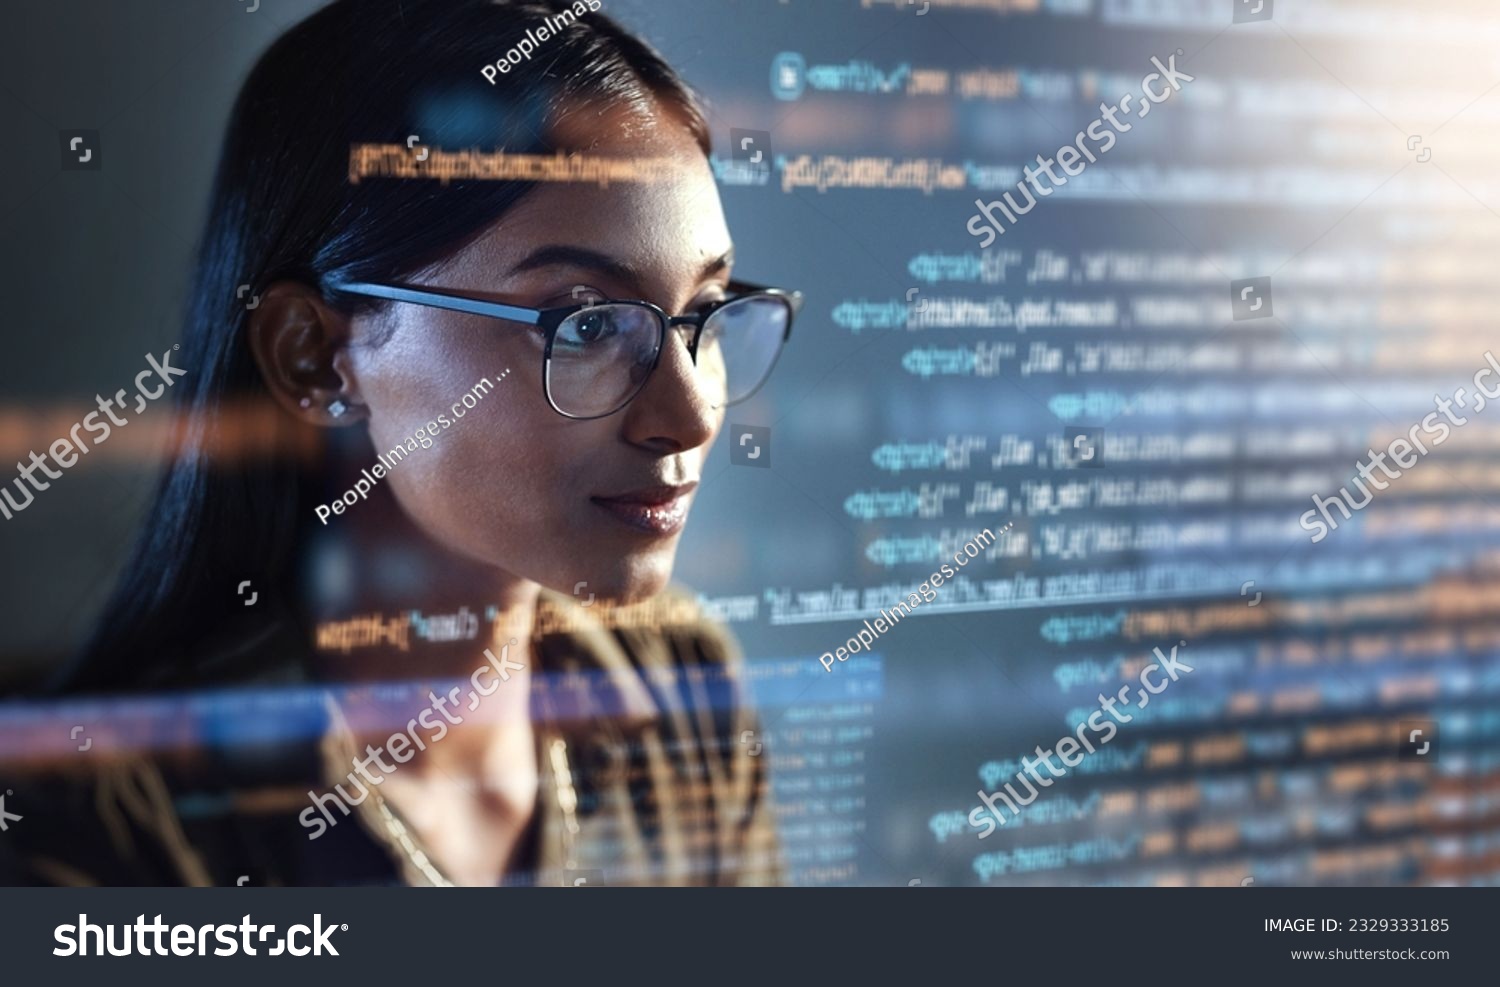 Software, data hologram and woman with code analytics, information technology and gdpr overlay. Programmer coding or IT person in glasses reading html script, programming and cyber security research #2329333185